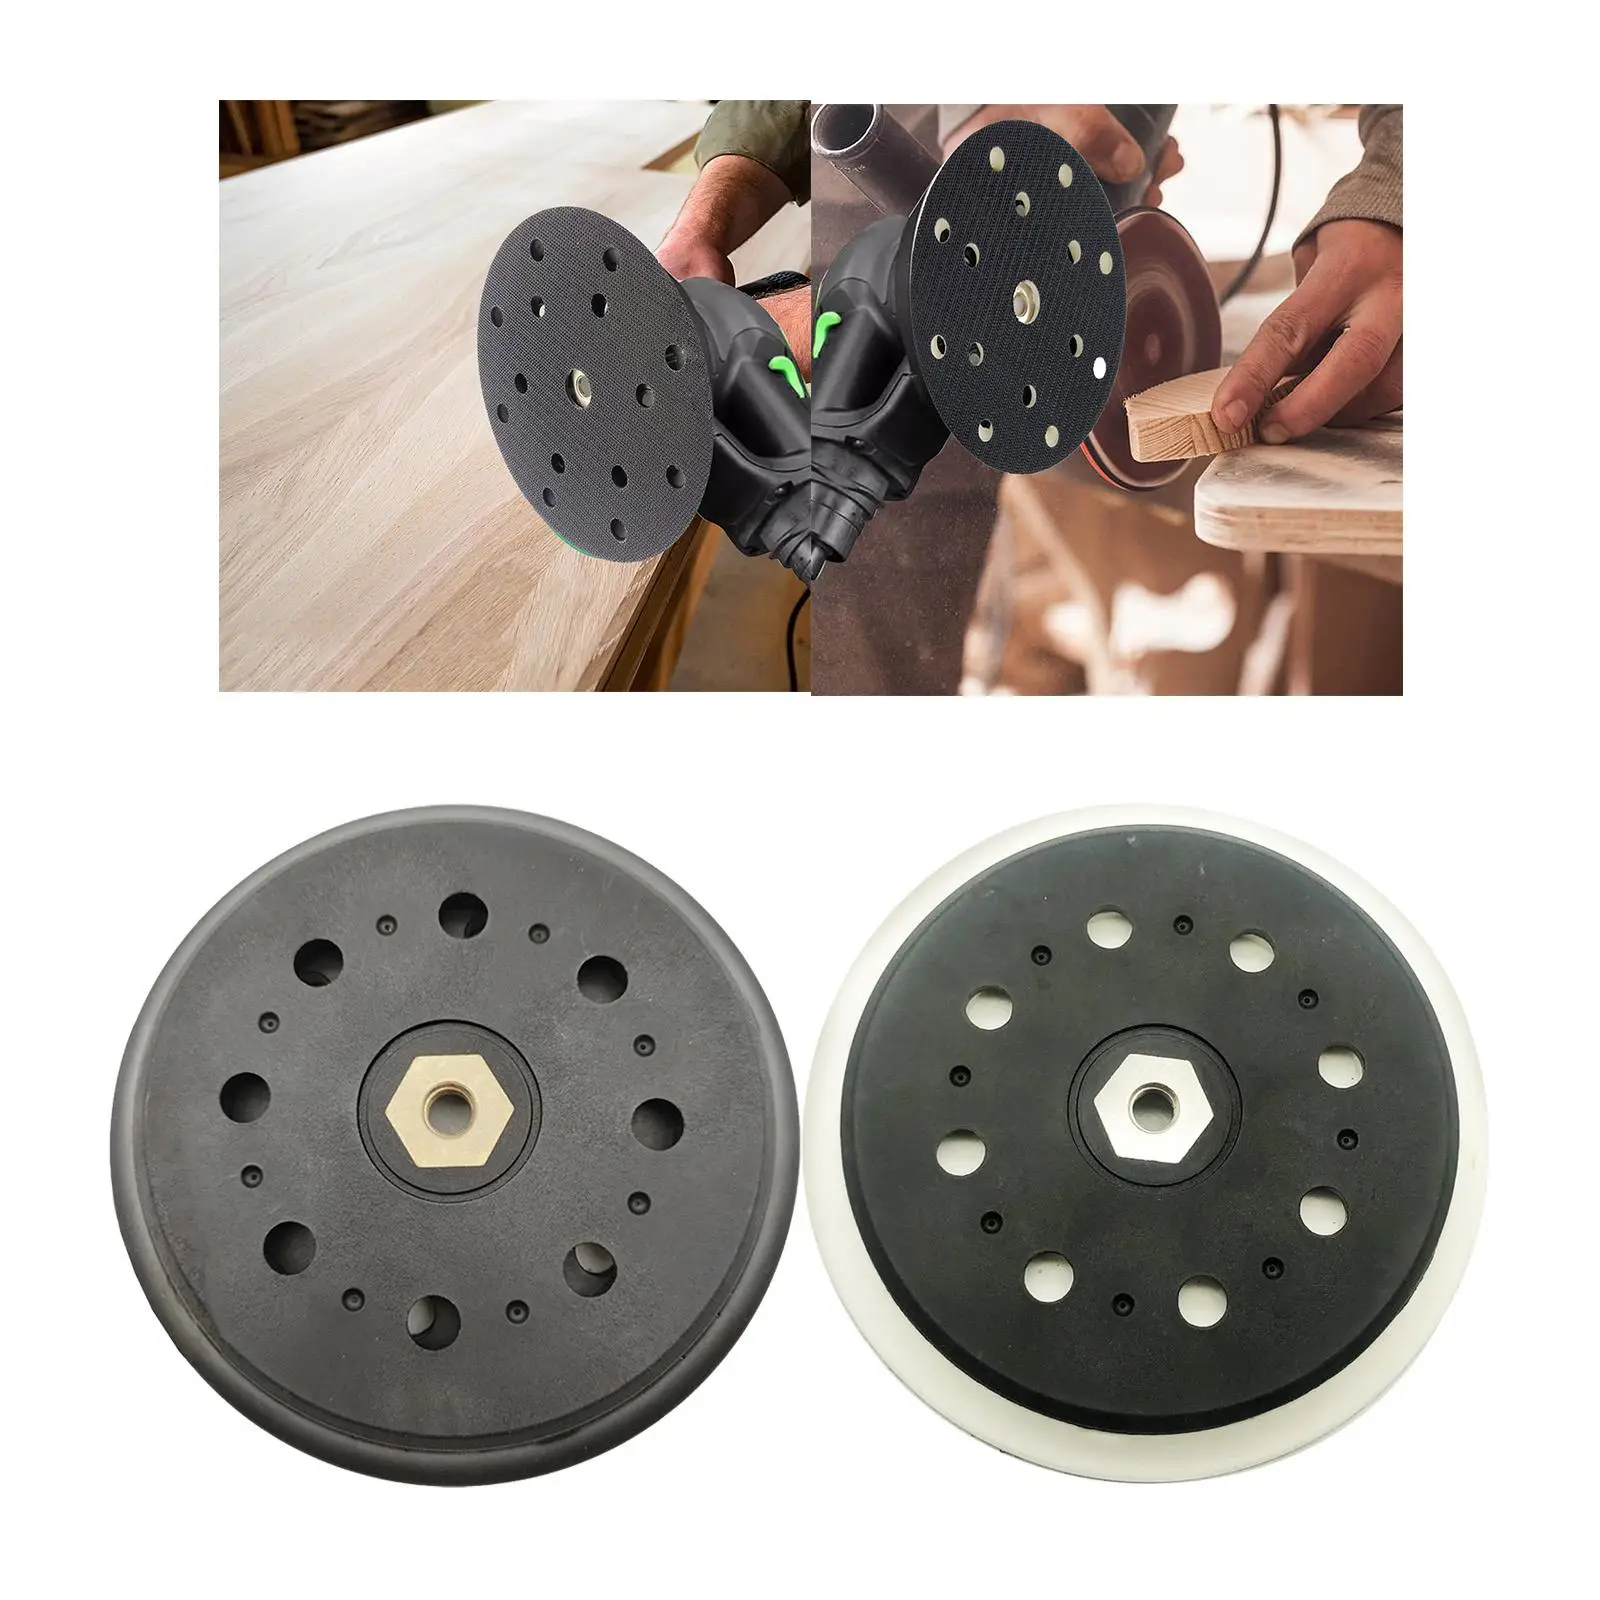 15 Hole Sanding Disc Pad 6 inch for Orbit Sander Ventilation Abrasive Tools Sander Polisher Tool Replacement for Woodworking